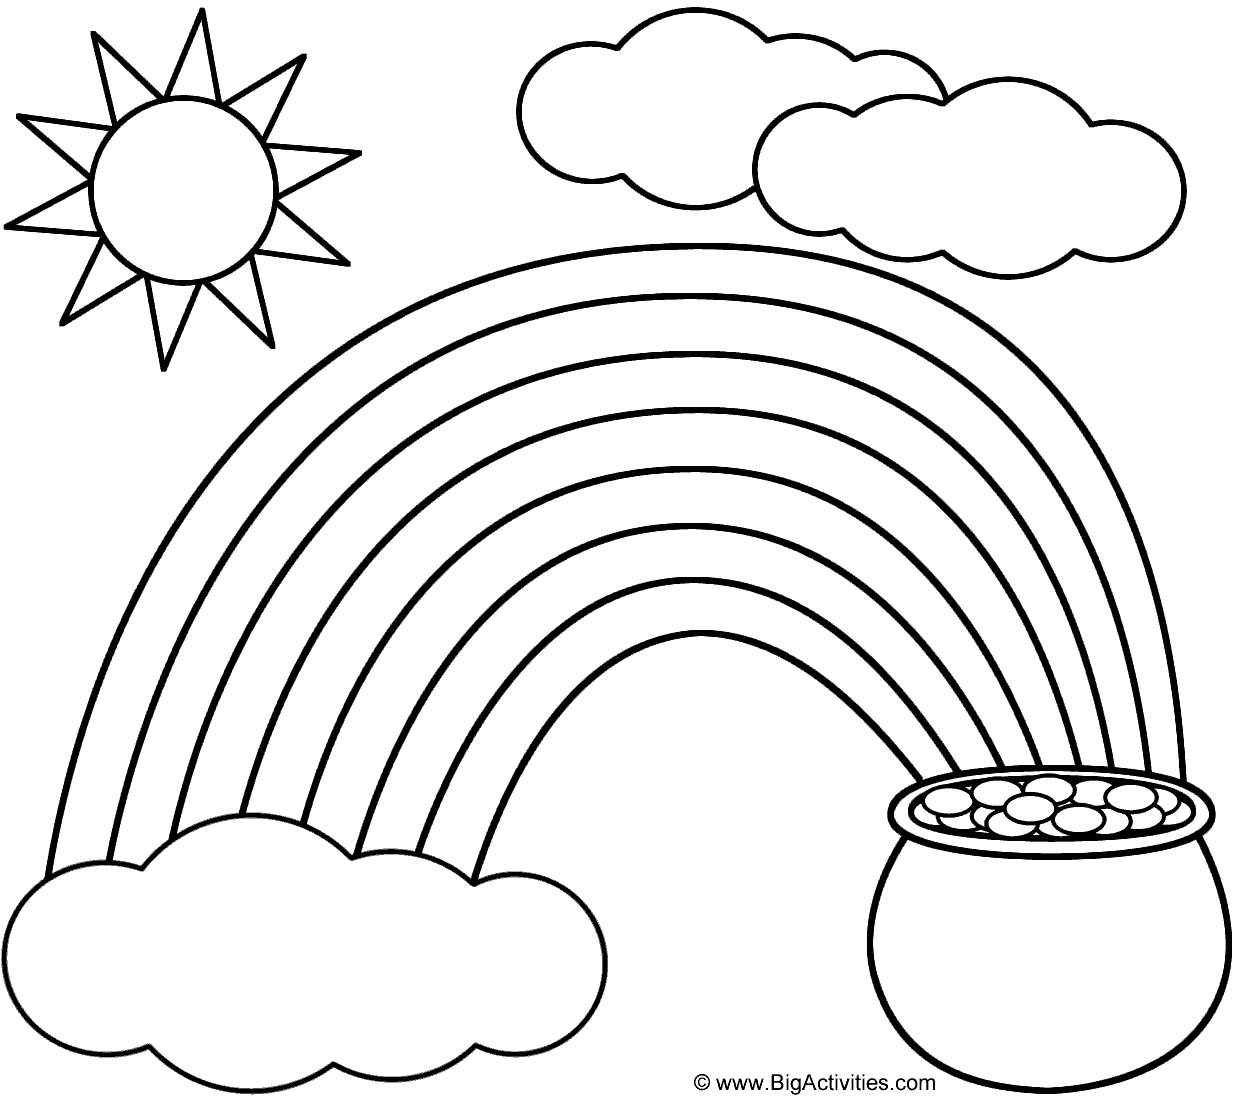  Rainbow  Pot of Gold Sun and Clouds  Coloring  Page  Nature 